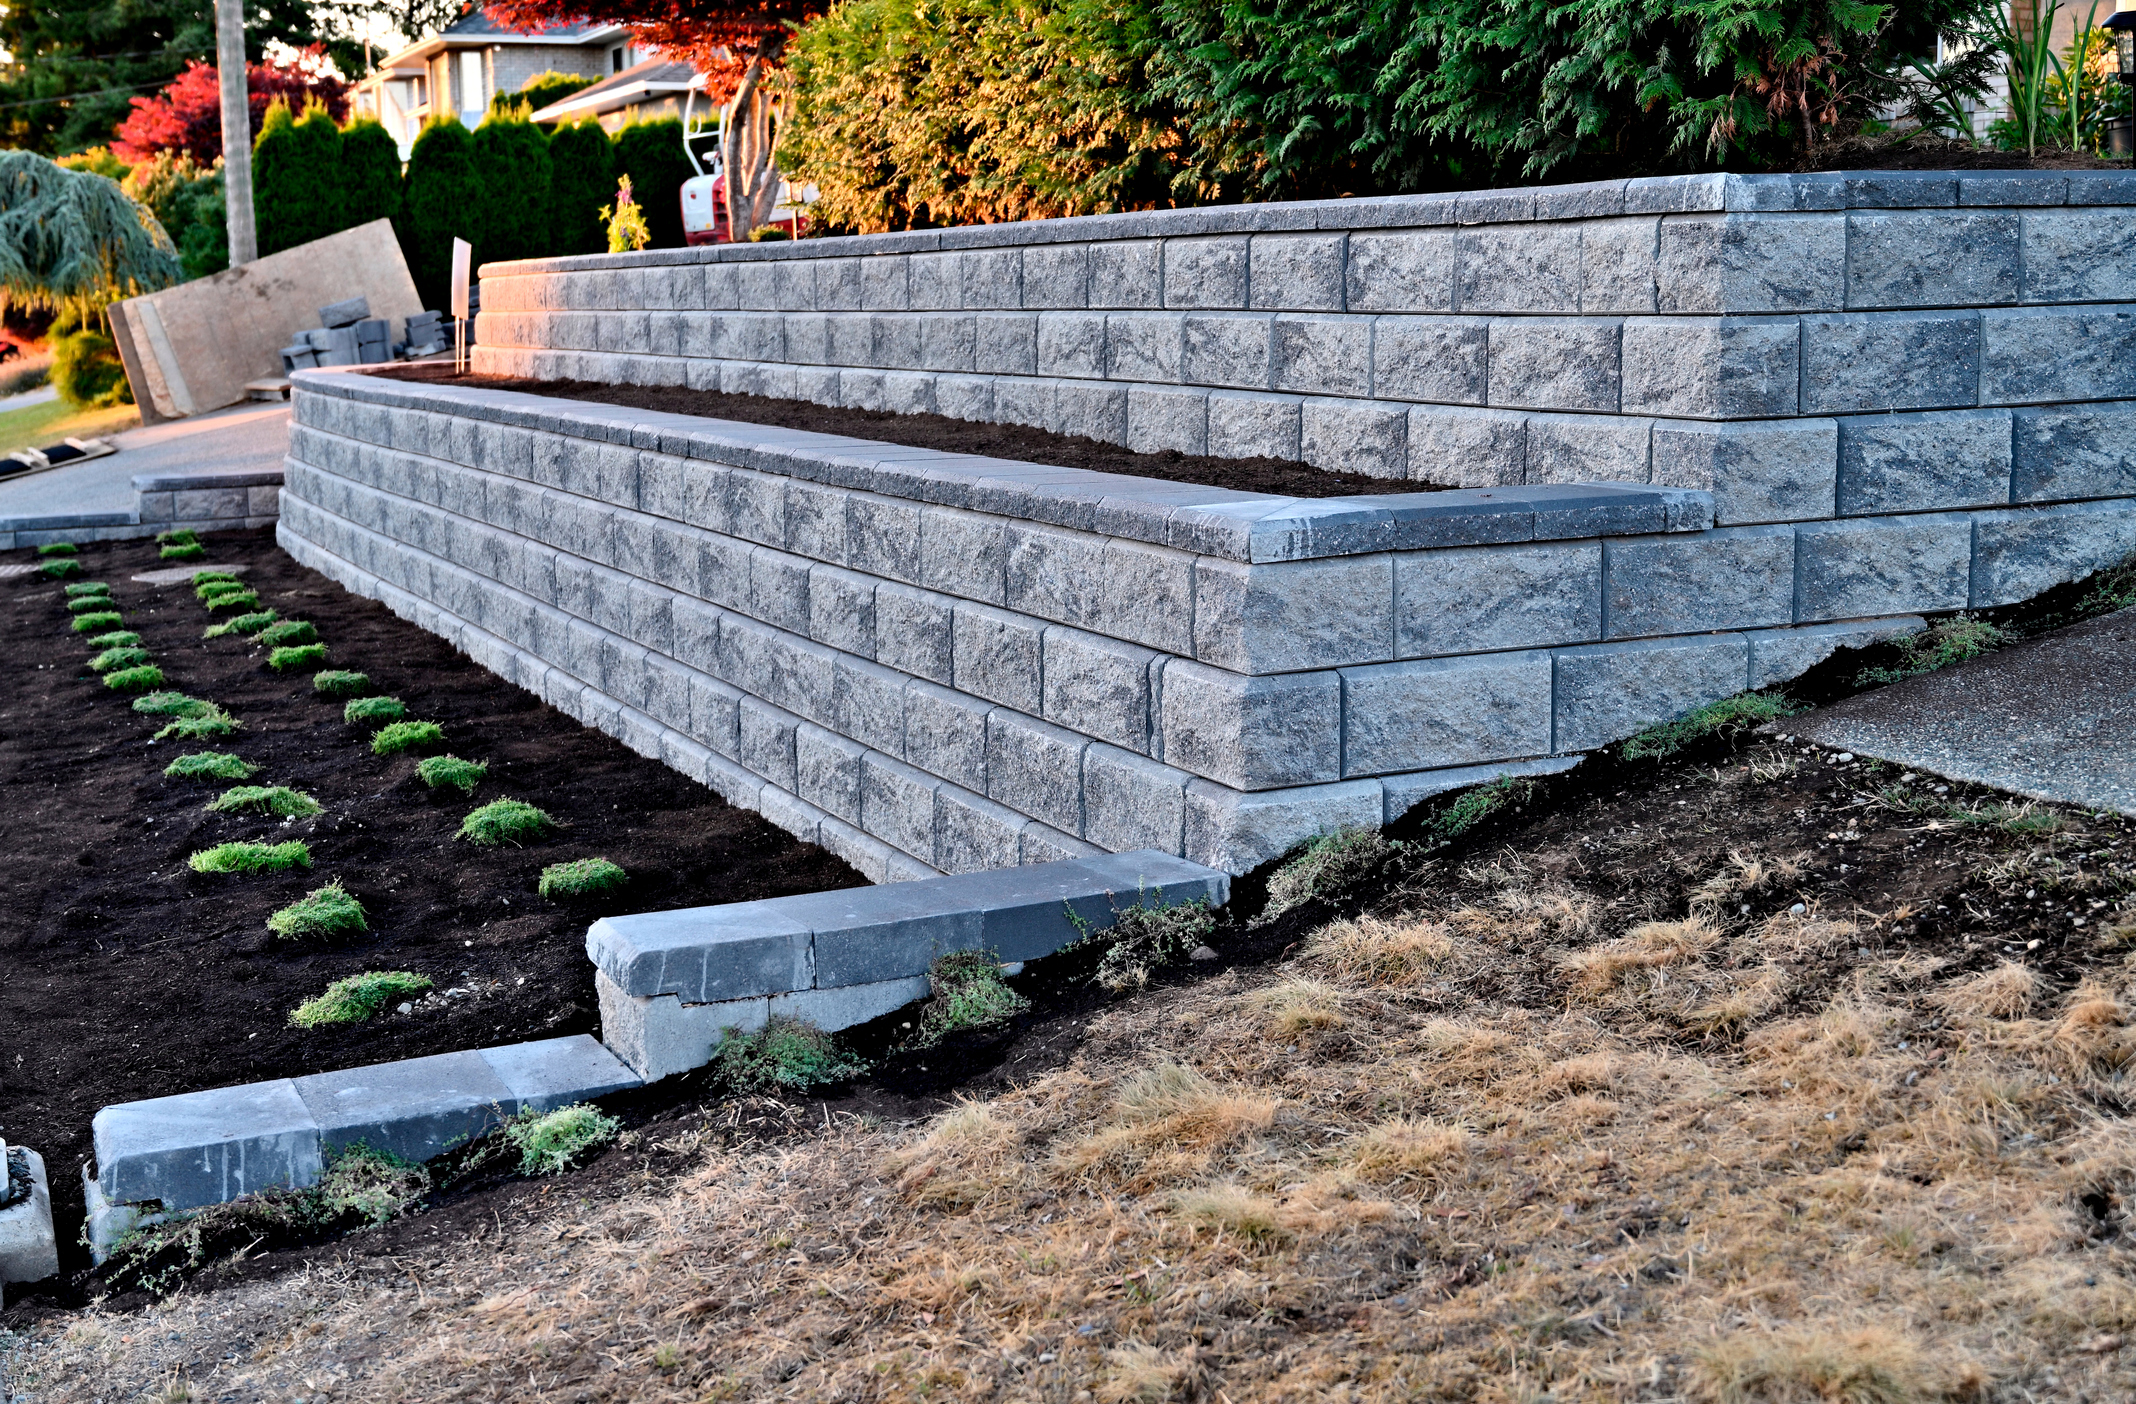 Interlocking concrete block retaining wall engineered with built in planters